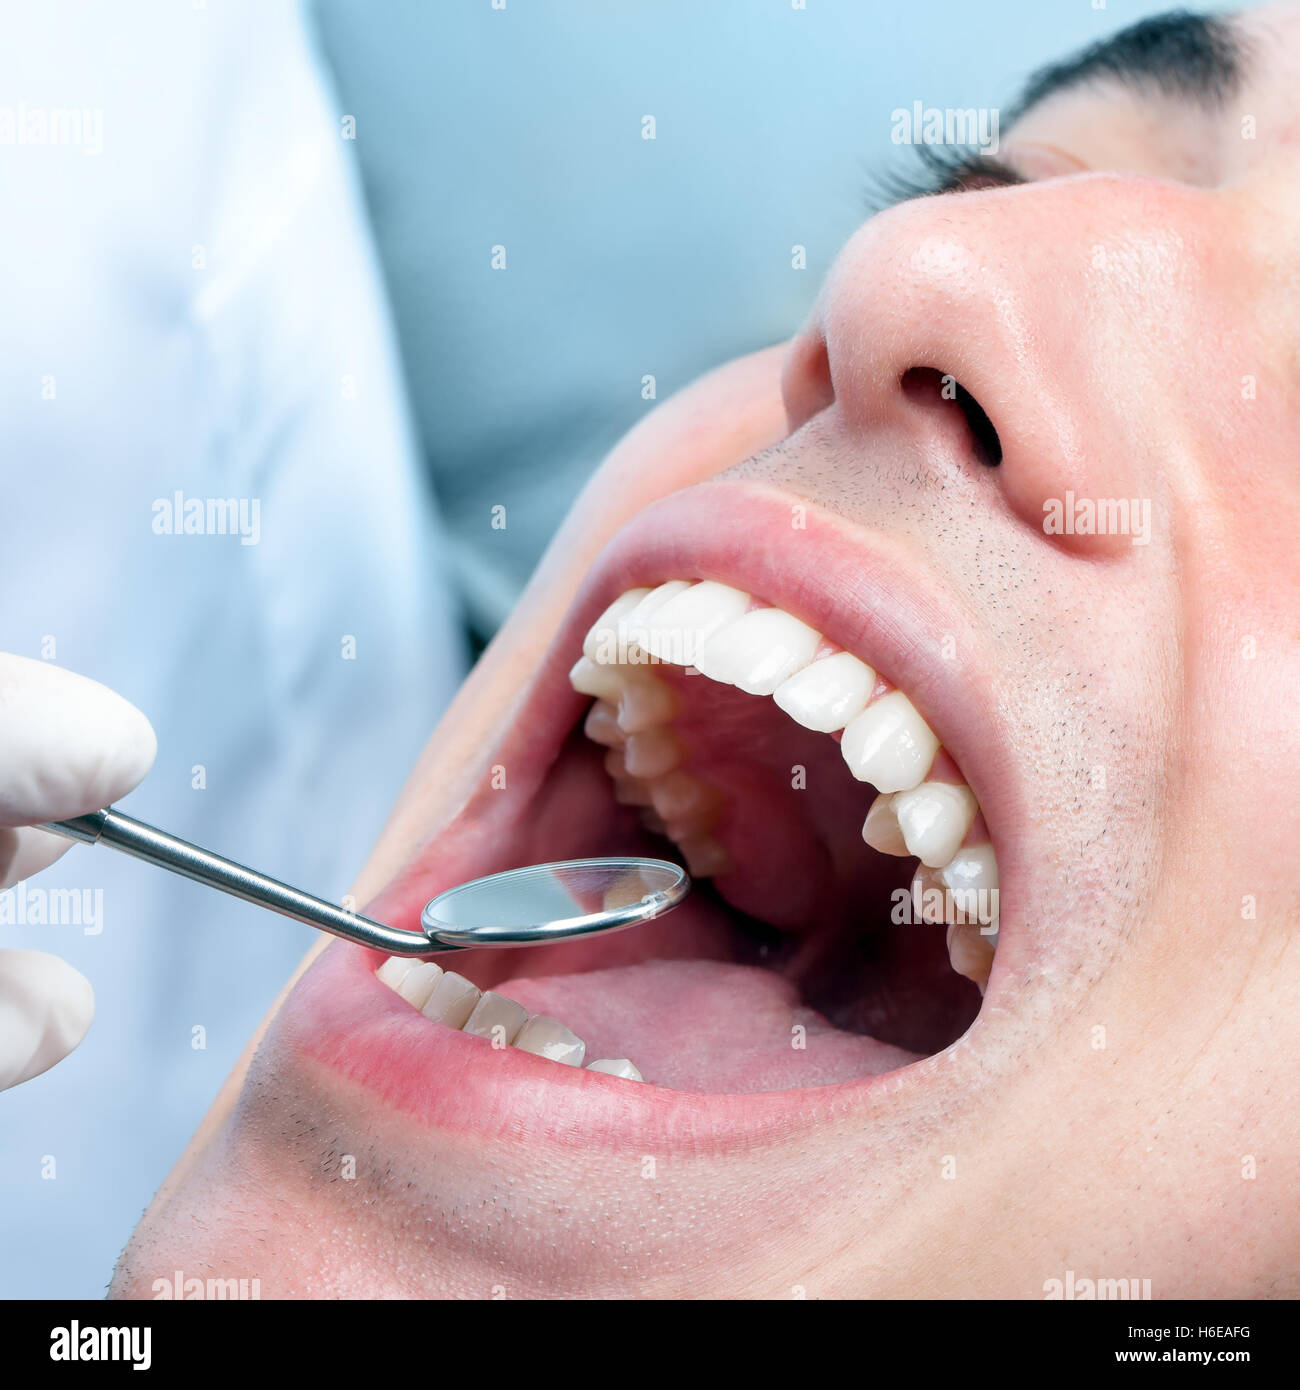 Macro close up of young man with open mouth showing healthy white teeth. Dentist hand checking teeth with mouth mirror. Stock Photo